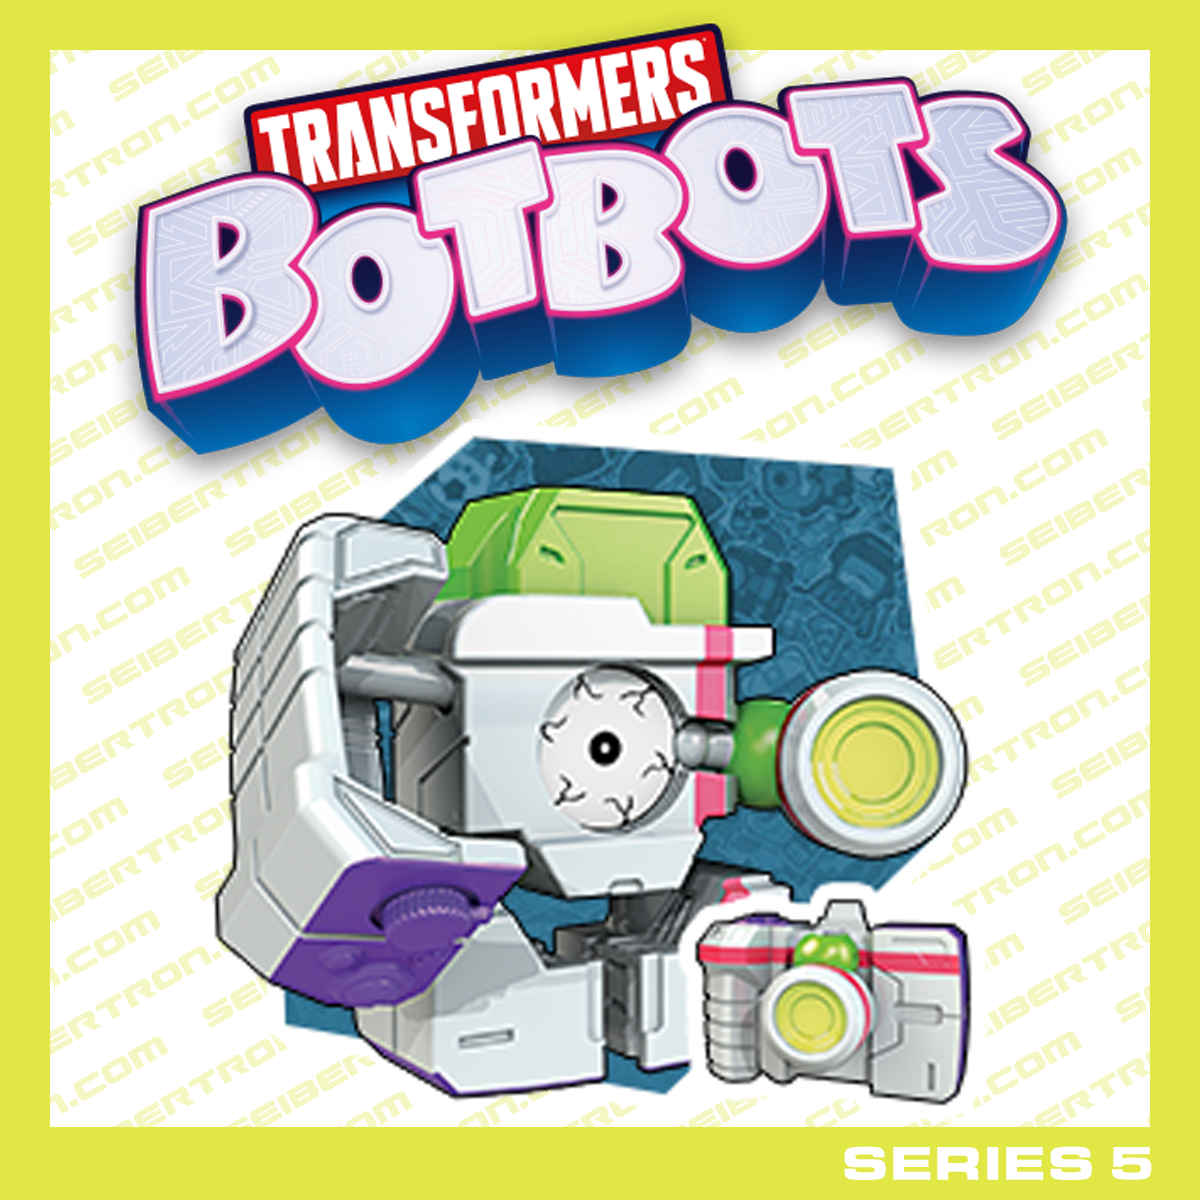 SHUDDER Transformers BotBots Series 5 Frequent Flyers camera Hasbro 2020